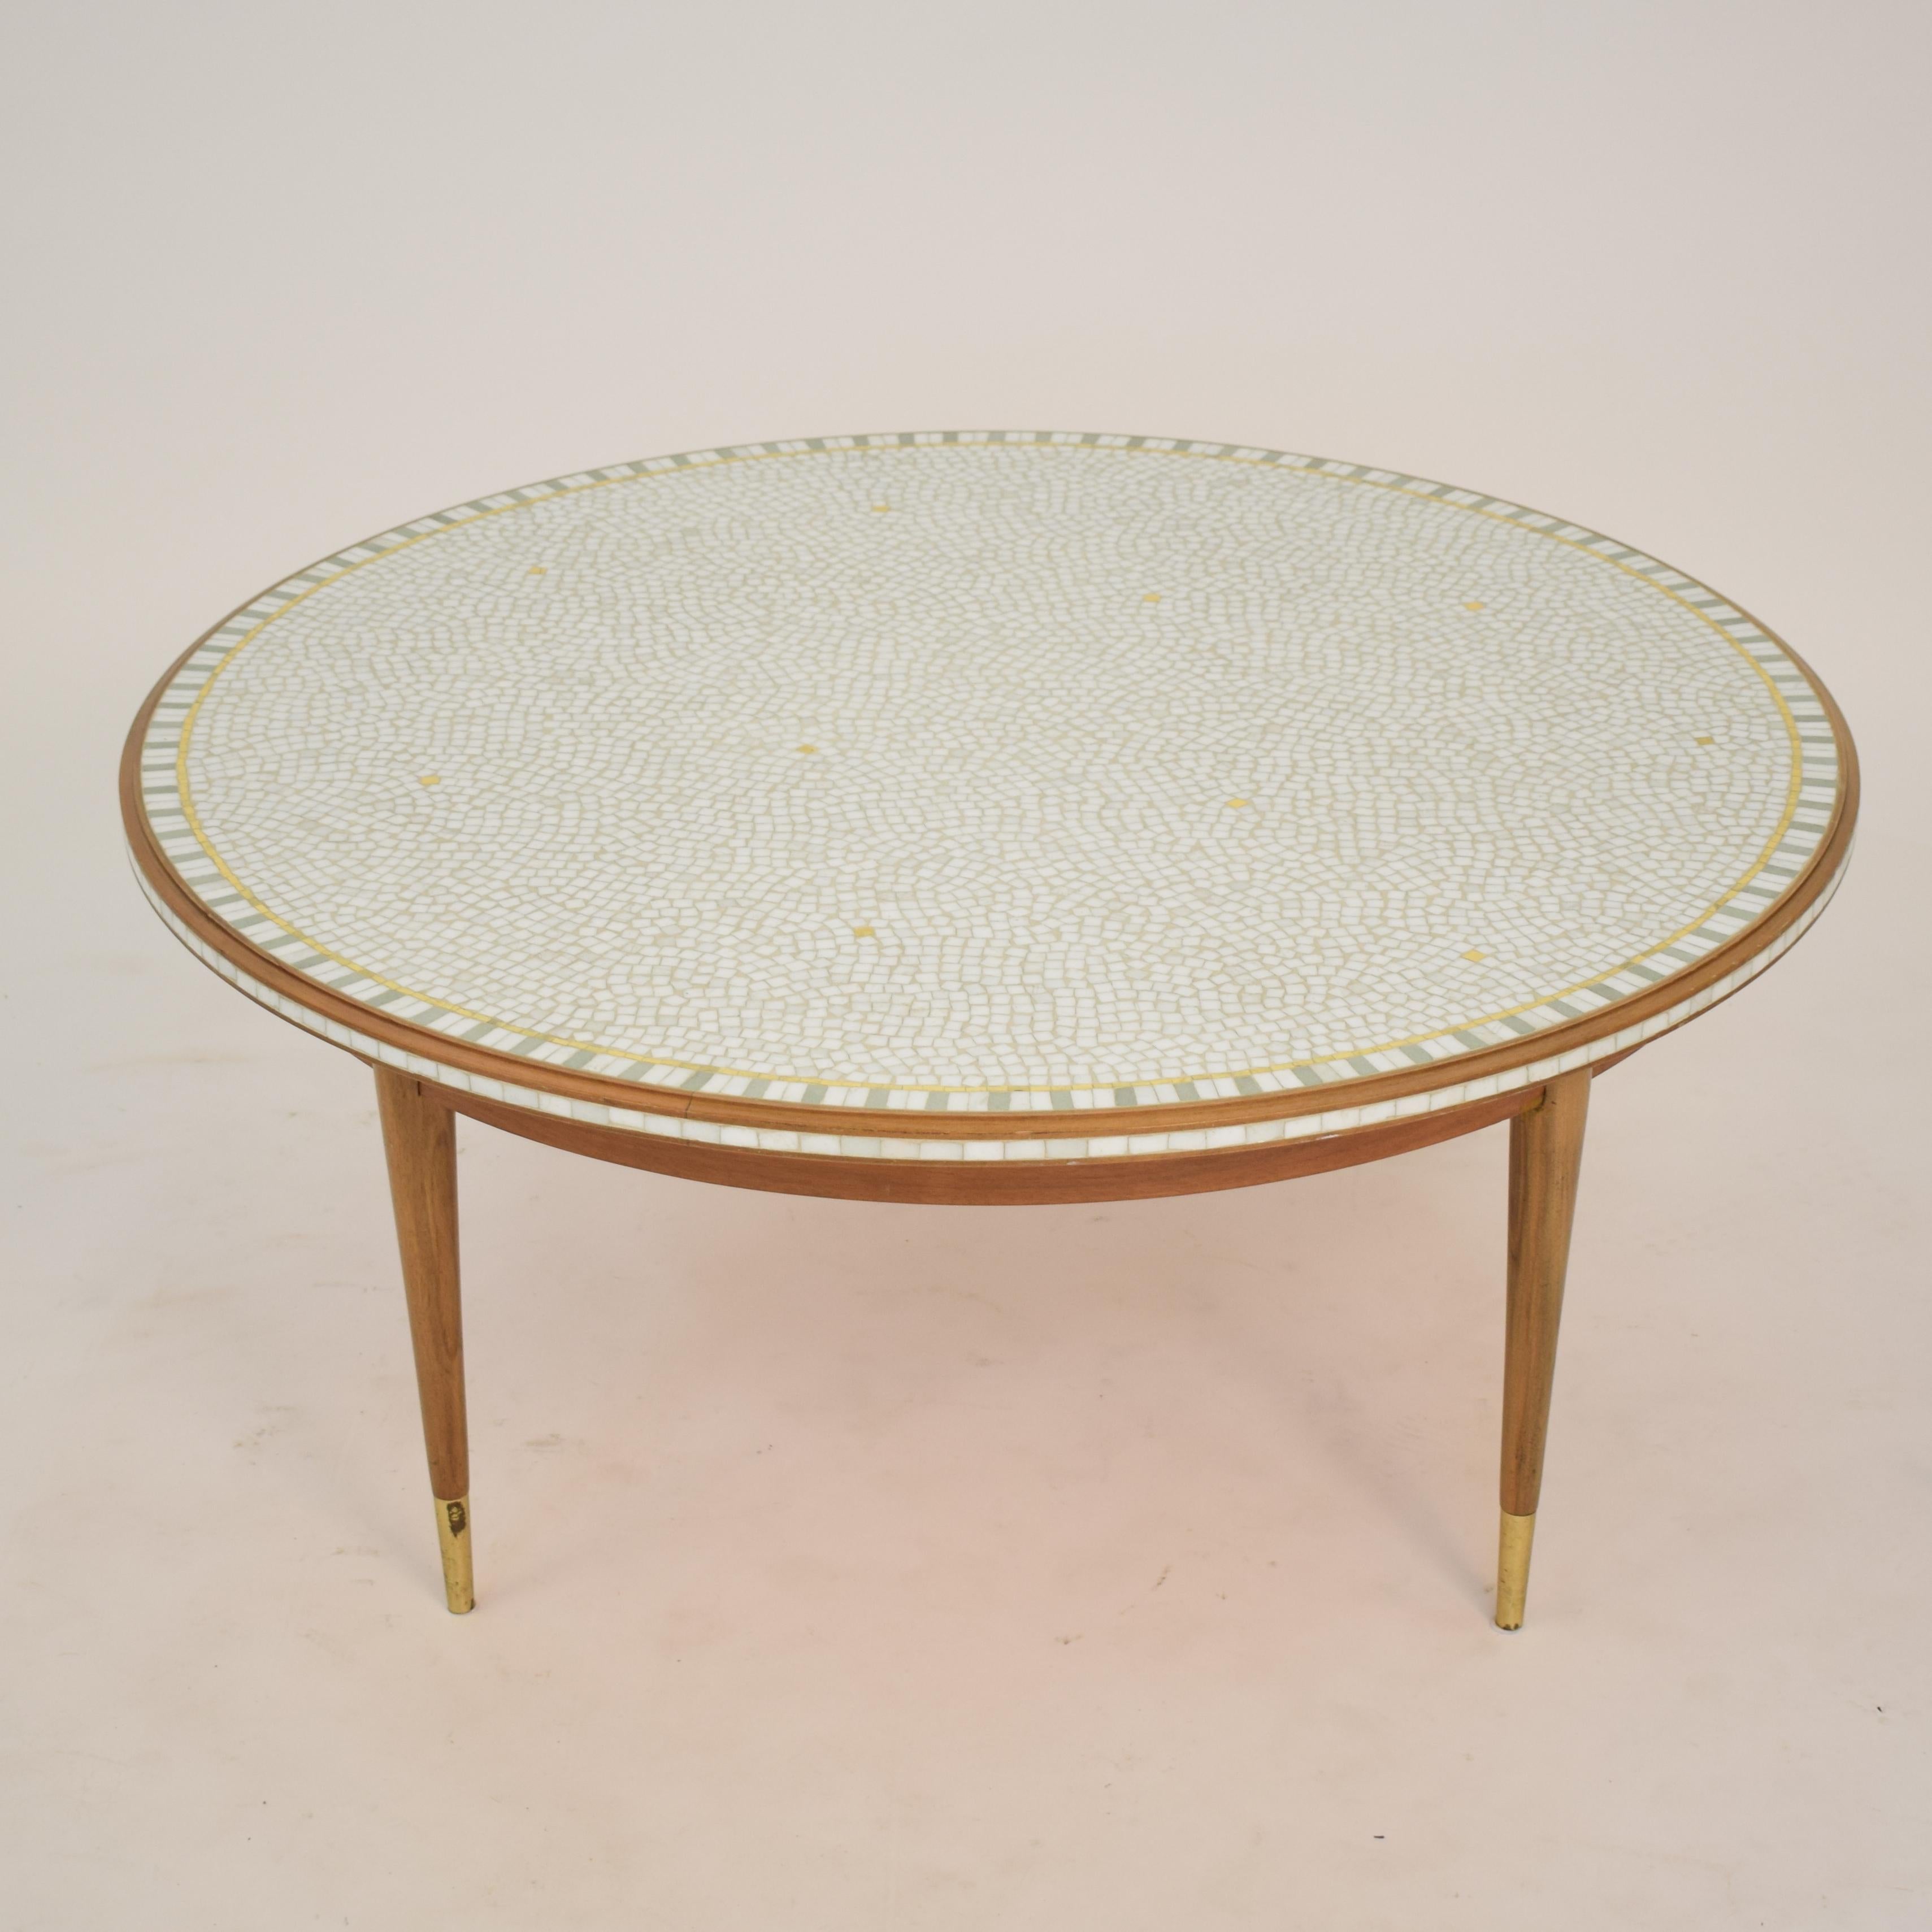 Mid-20th Century Midcentury Round Mosaic Coffee Table by Berthold Müller with Walnut Base, 1960s